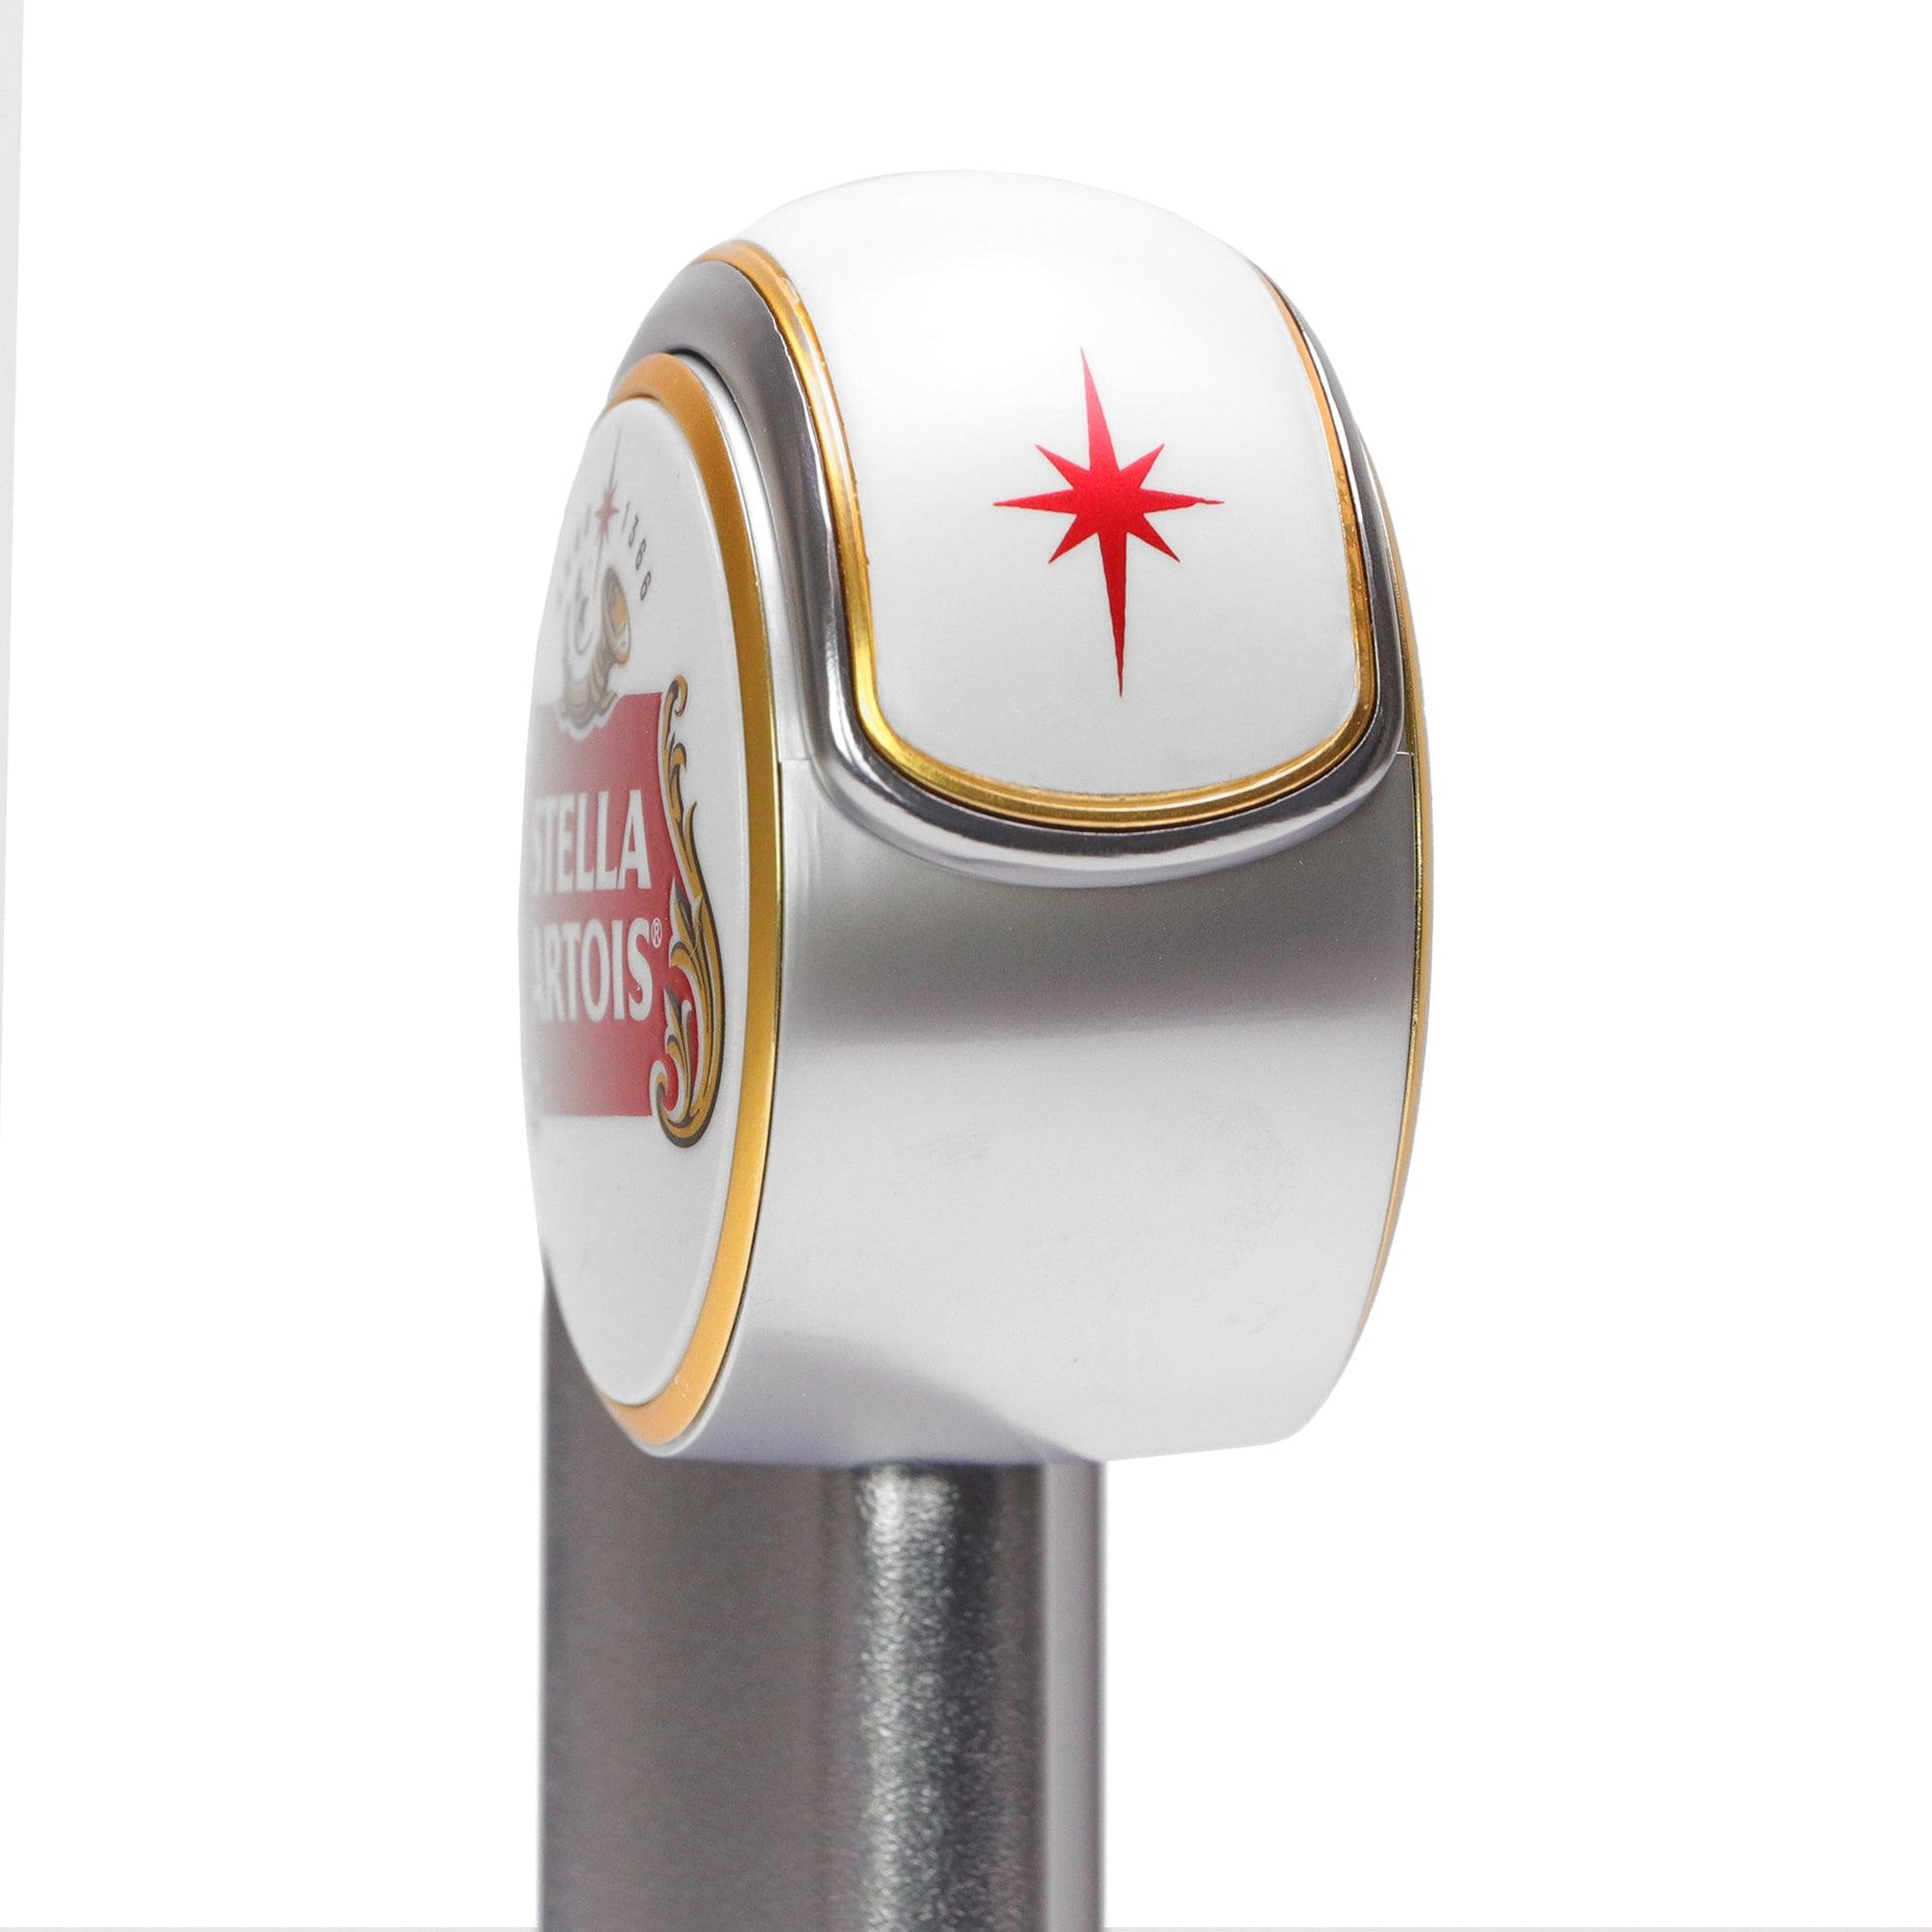 Side view of top of Stella Artois Tap handle